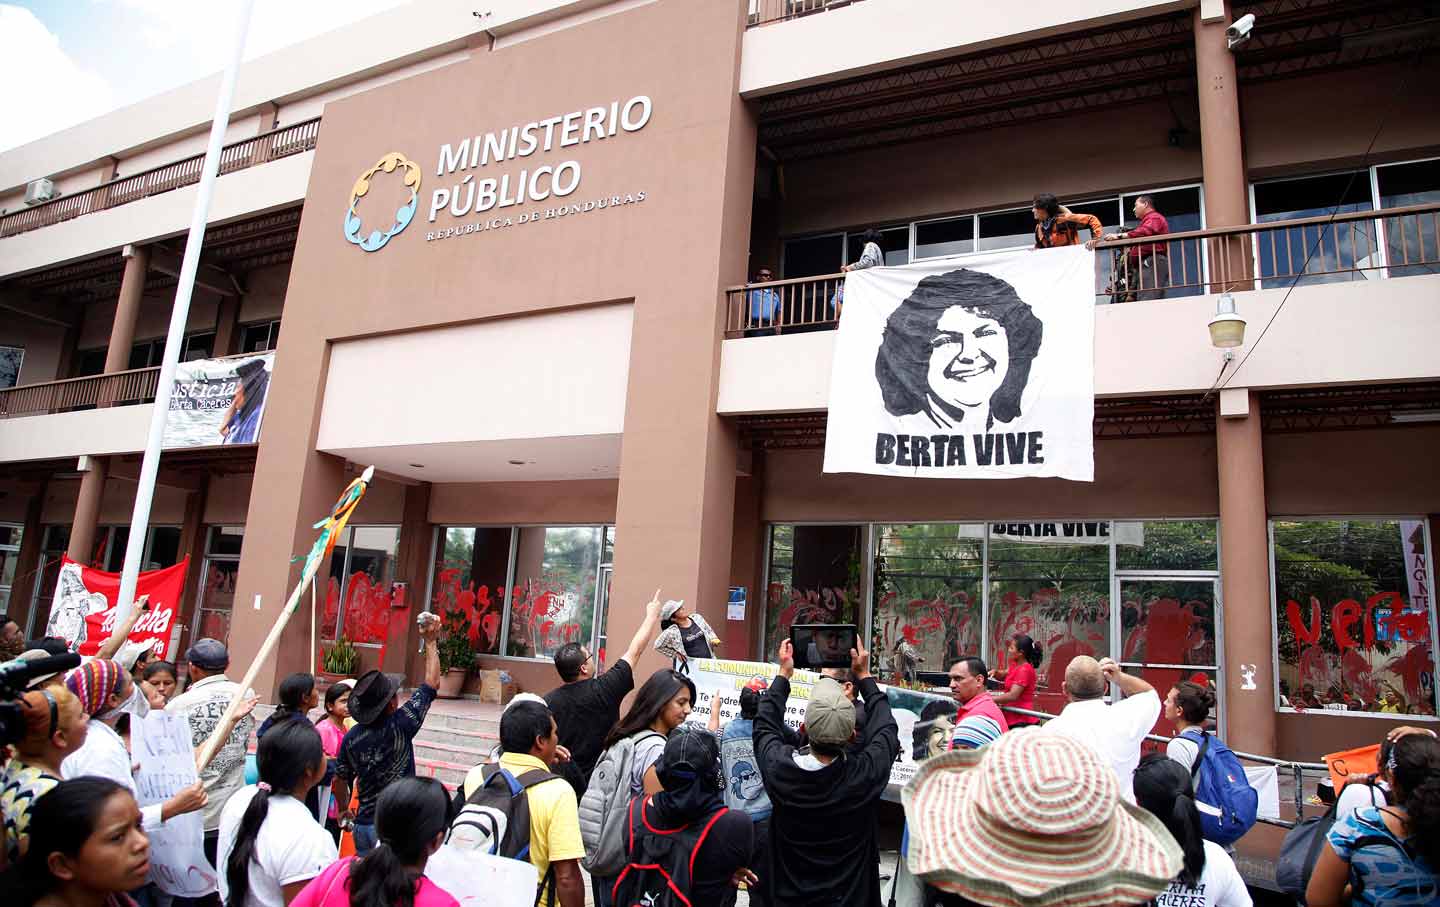 Protesters for Berta Caceres